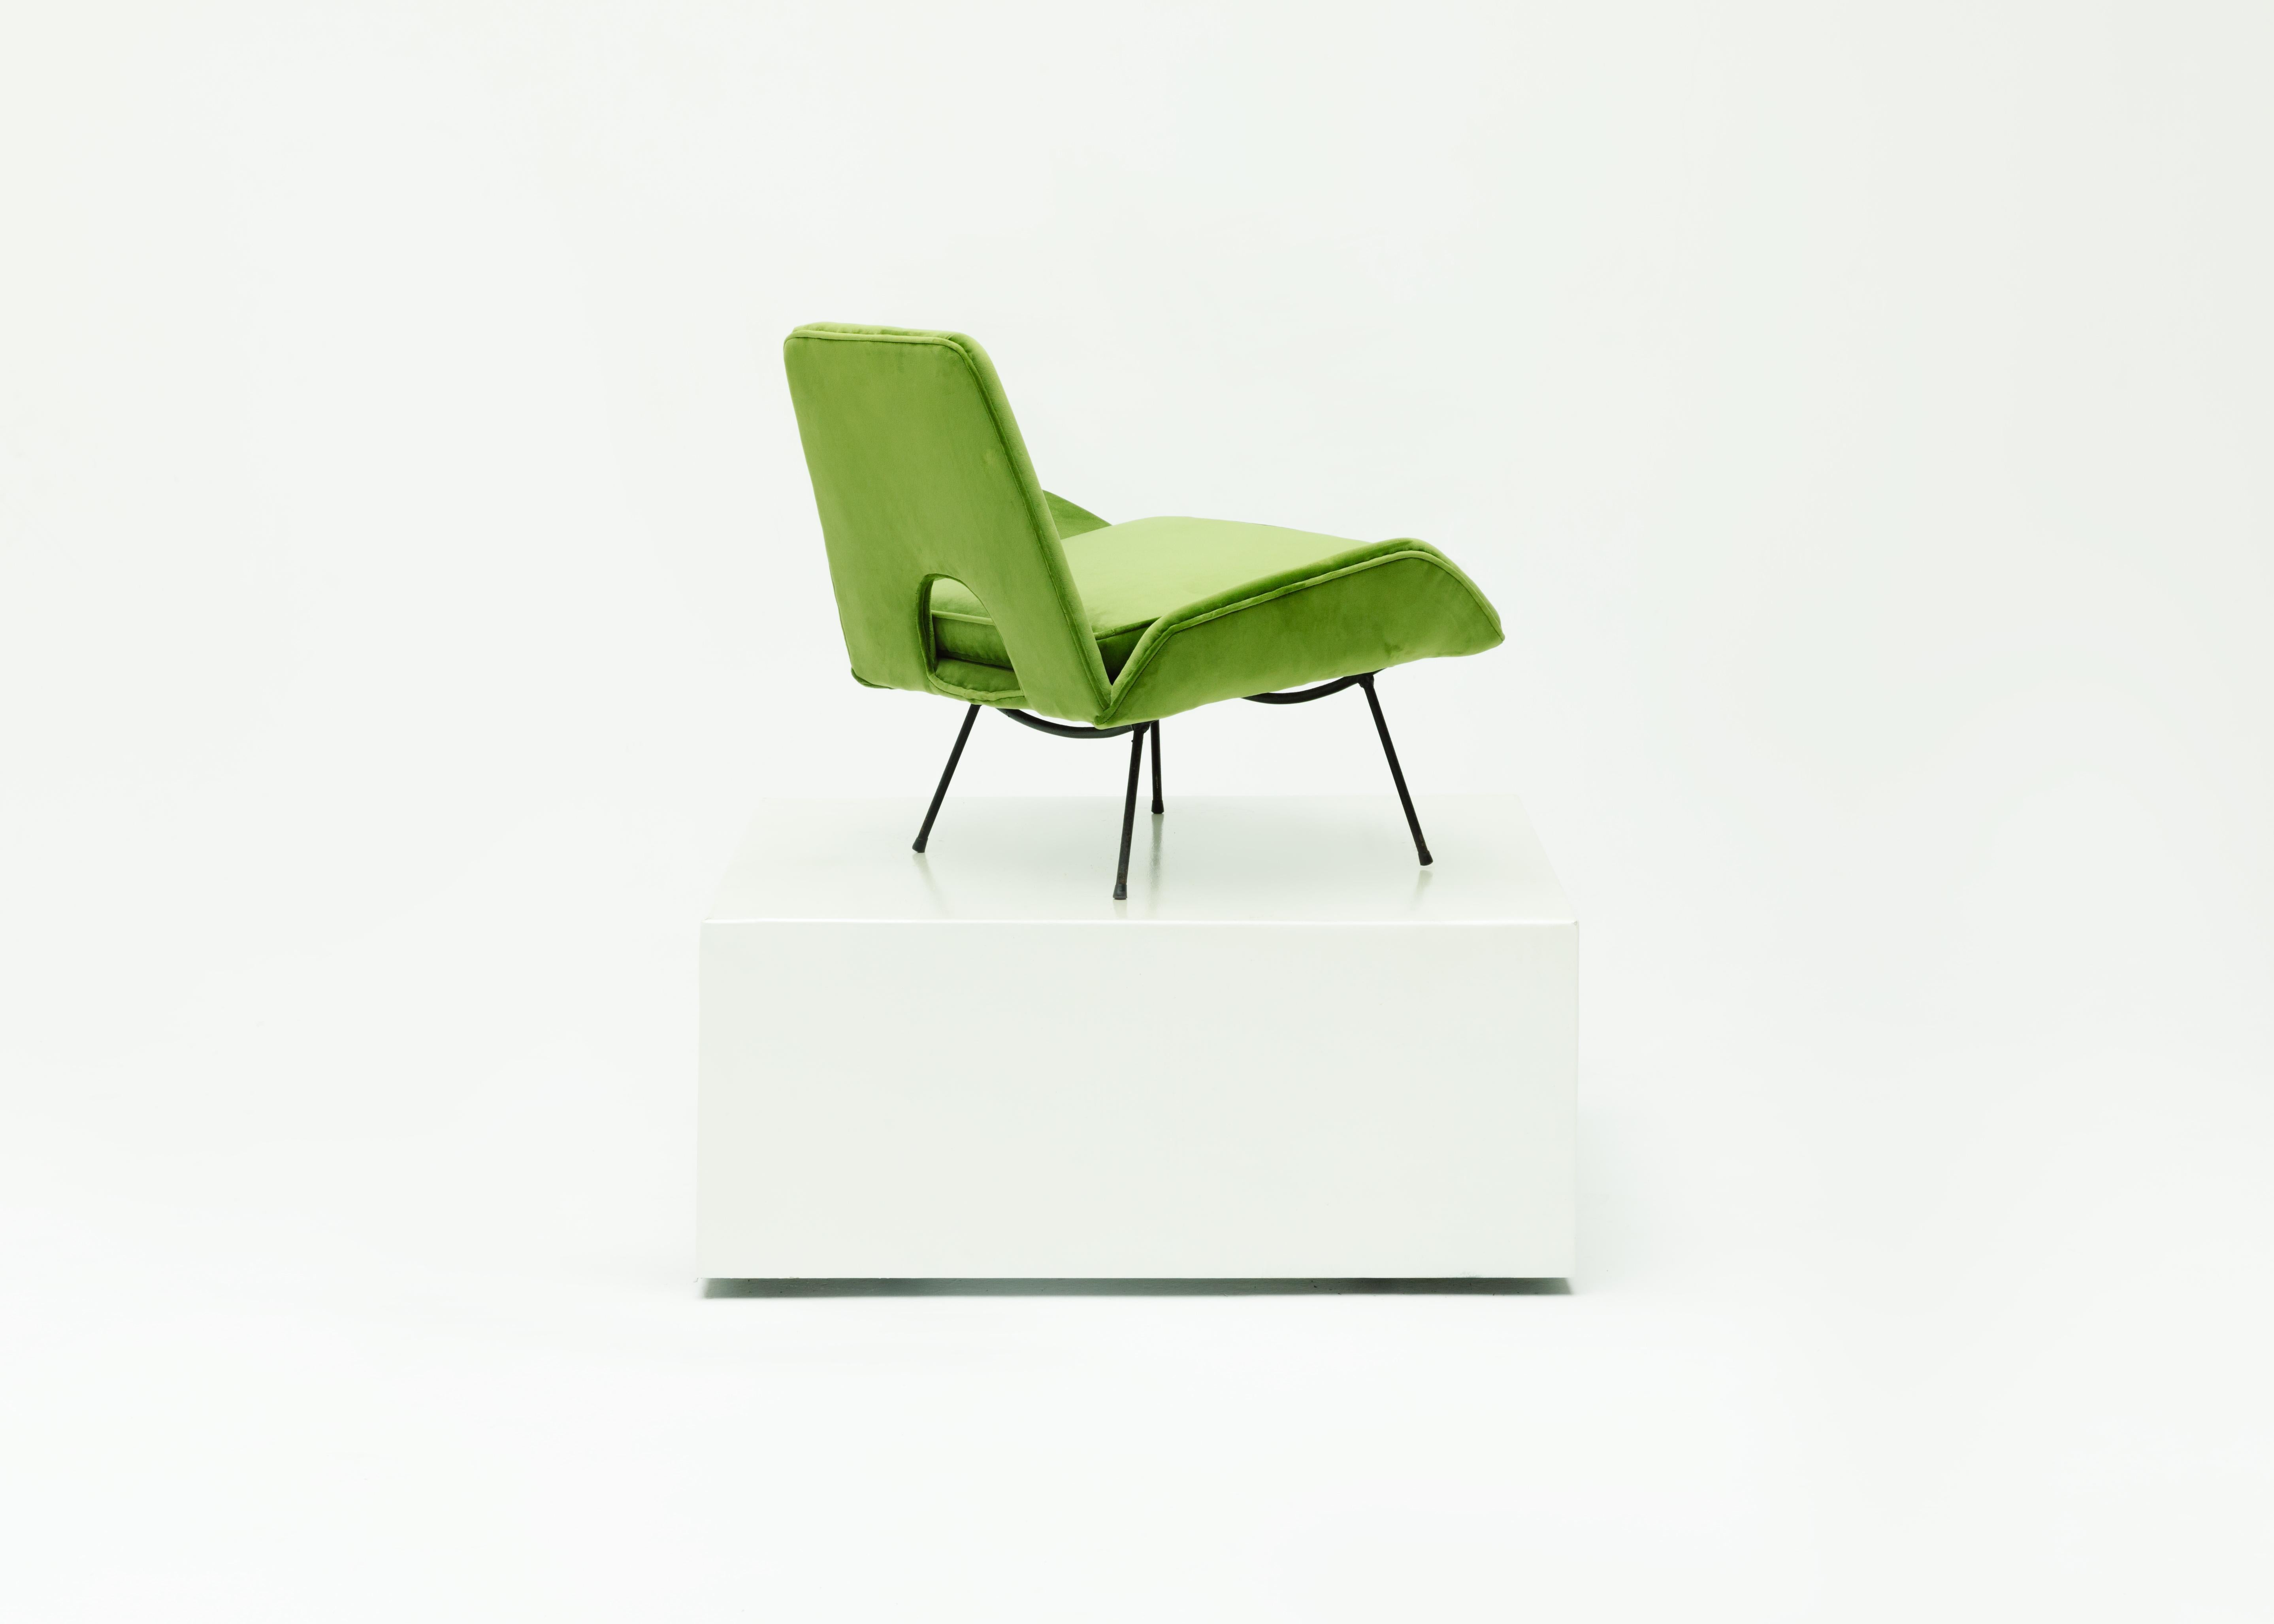 Designed by Carlo Hauner and Martin Eisler for Forma S.A Móveis e Objetos de Arte in circa 1960.
A modern Brazilian armchair made in the curved iron structure and recently upholstery in green velvet. 

The armchair feature a single volume of seat